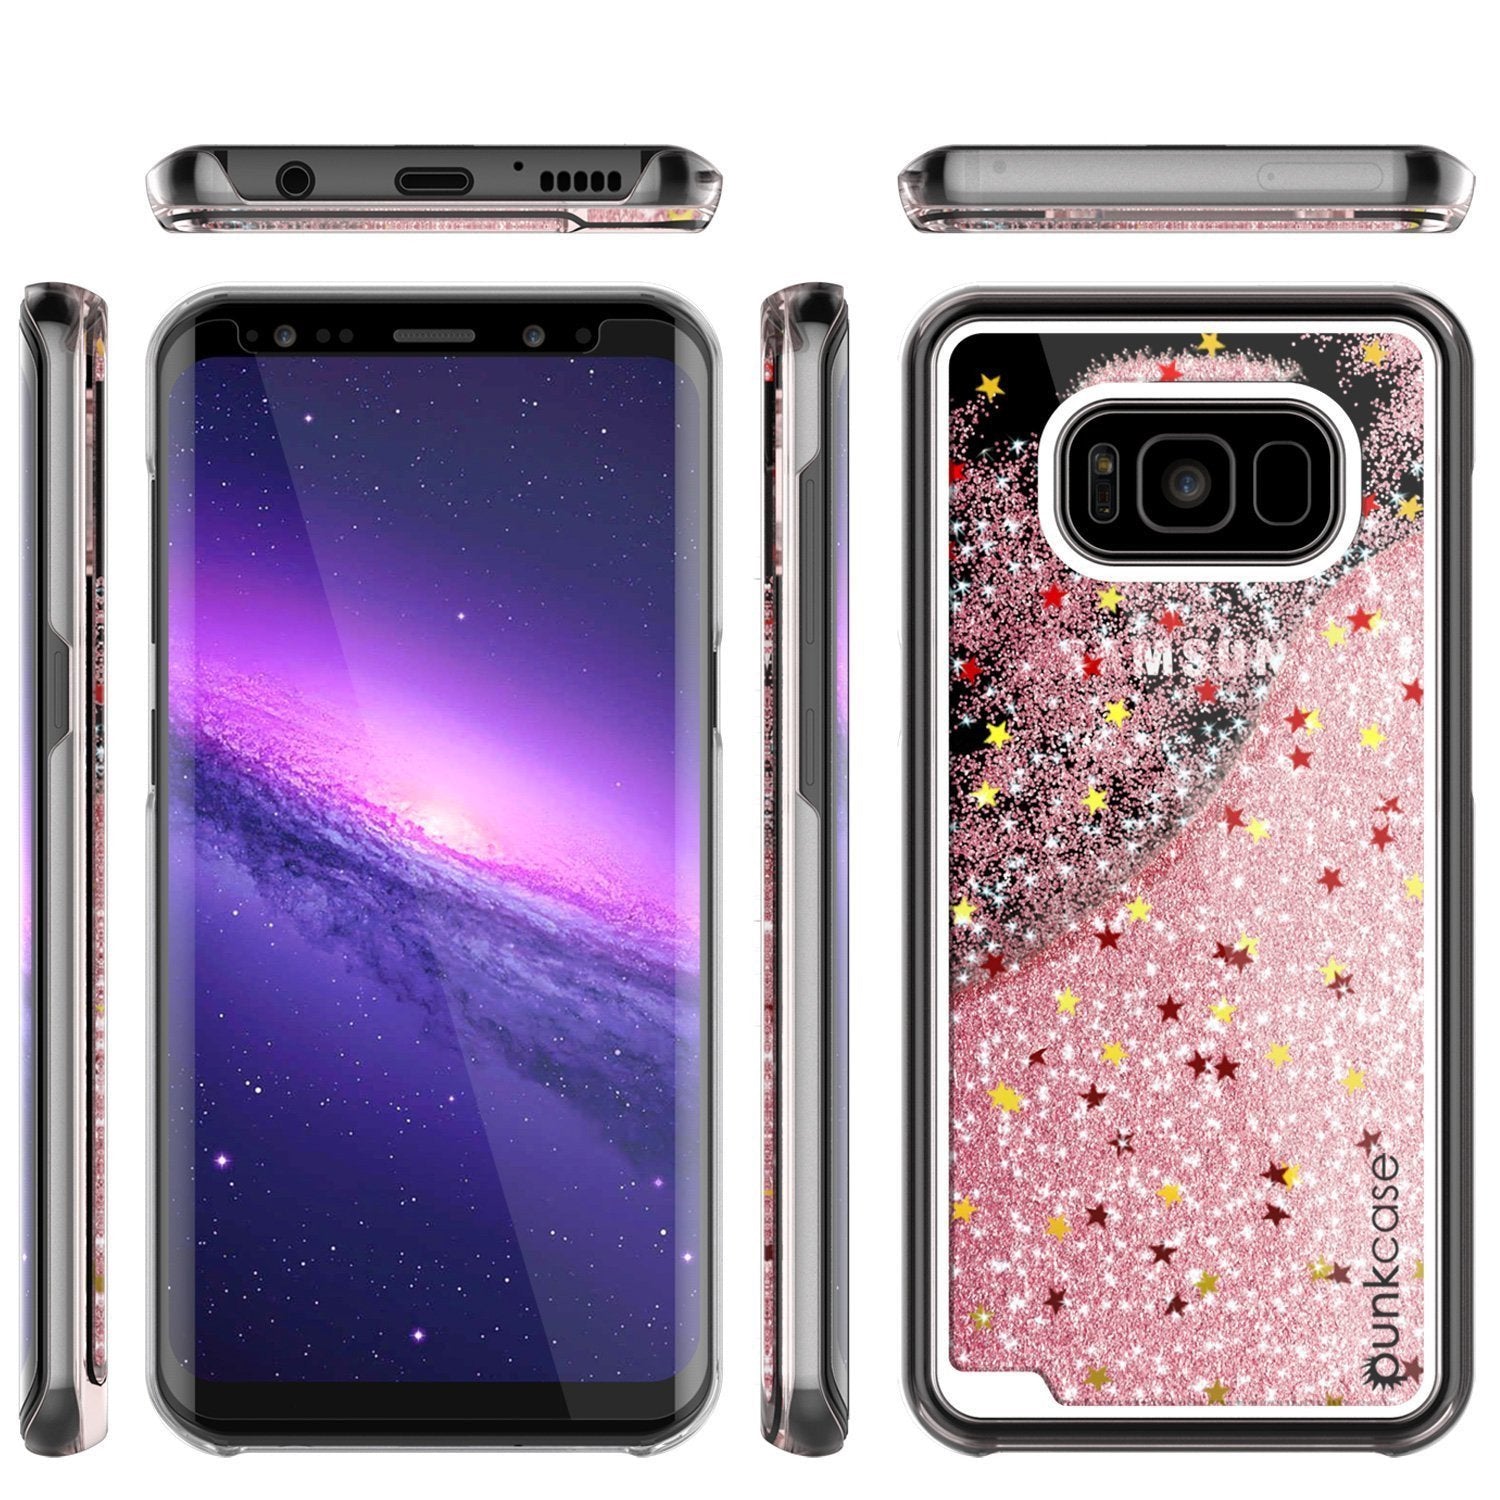 S8 Plus Case, Punkcase [Liquid Series] Protective Dual Layer Floating Glitter Cover with lots of Bling & Sparkle + PunkShield Screen Protector for Samsungs Galaxy S8+ [Rose Gold] - PunkCase NZ